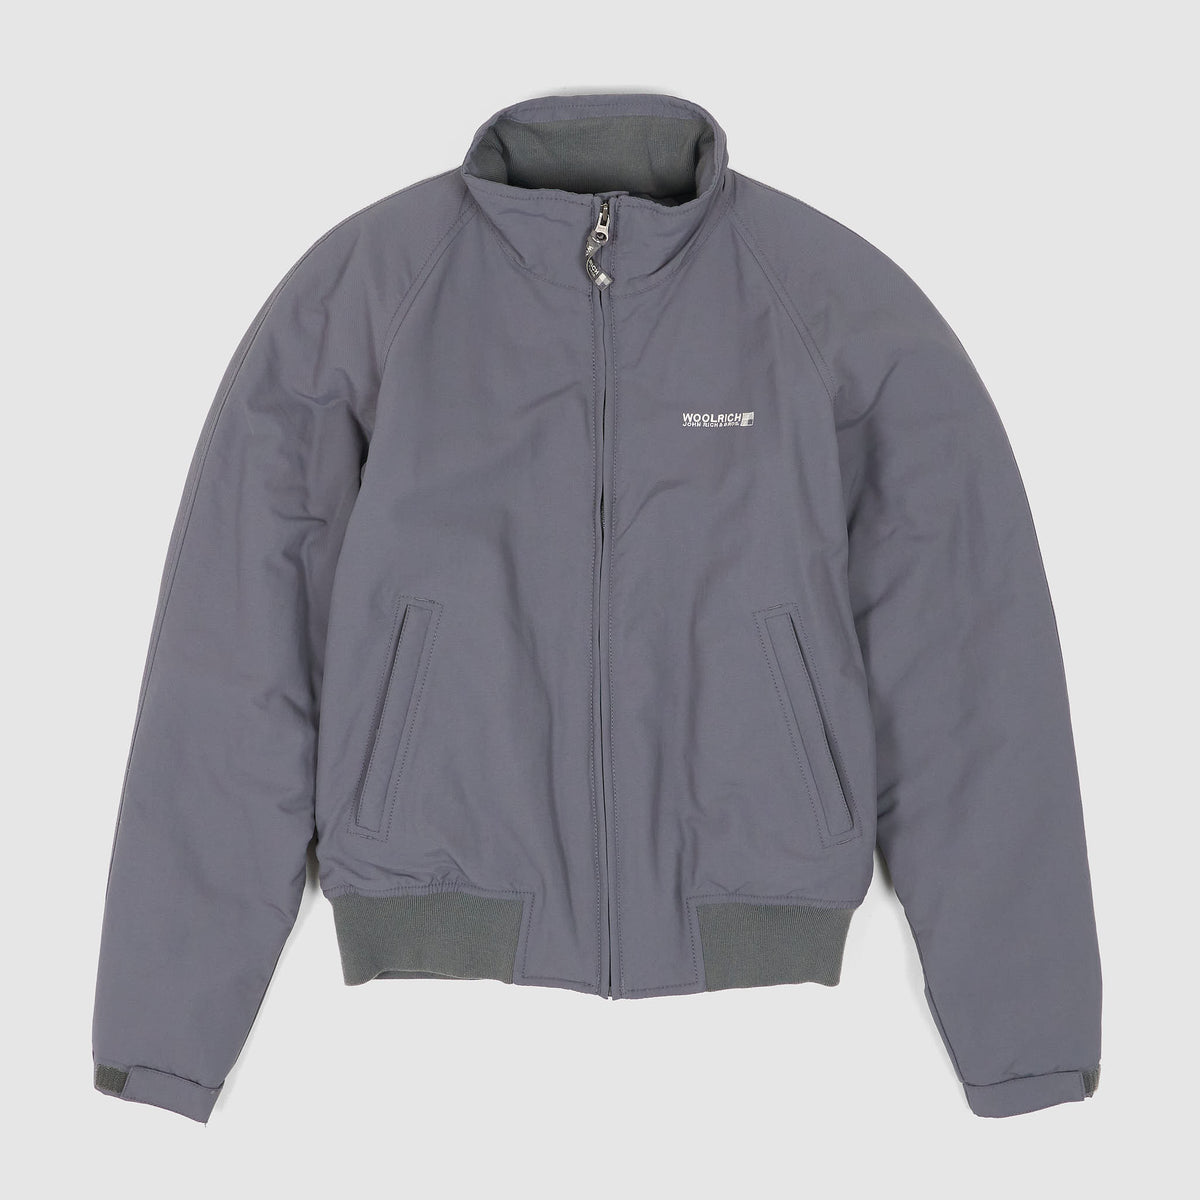 Woolrich Lumber Jacket with POLARTEC® Pile Lining